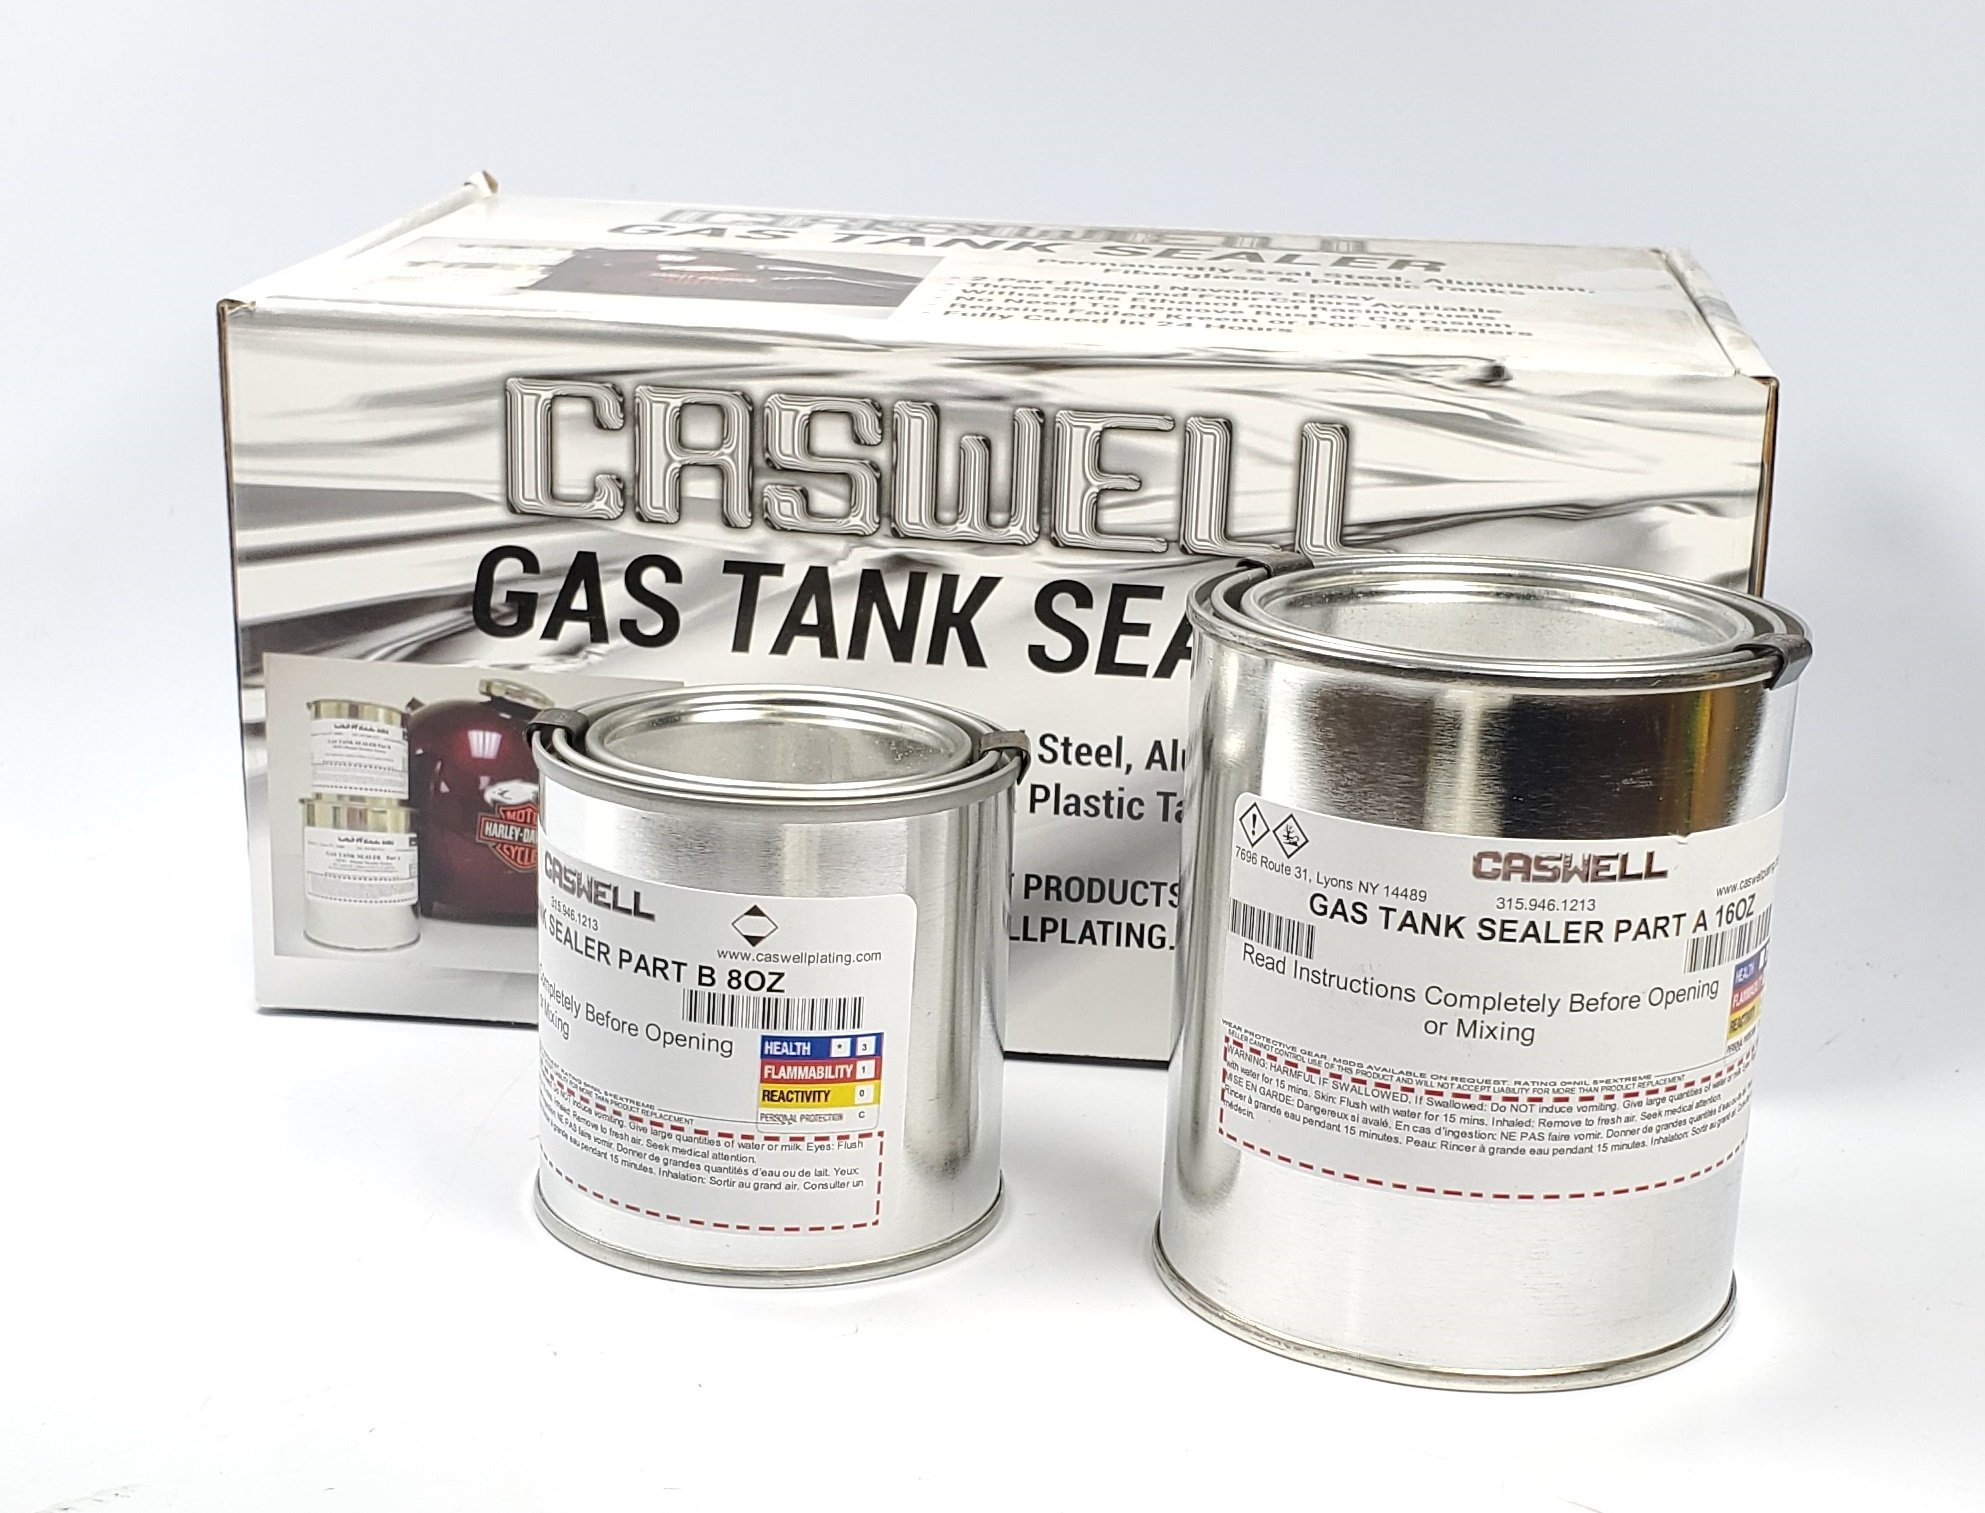 Gas Tank Sealer and instructions